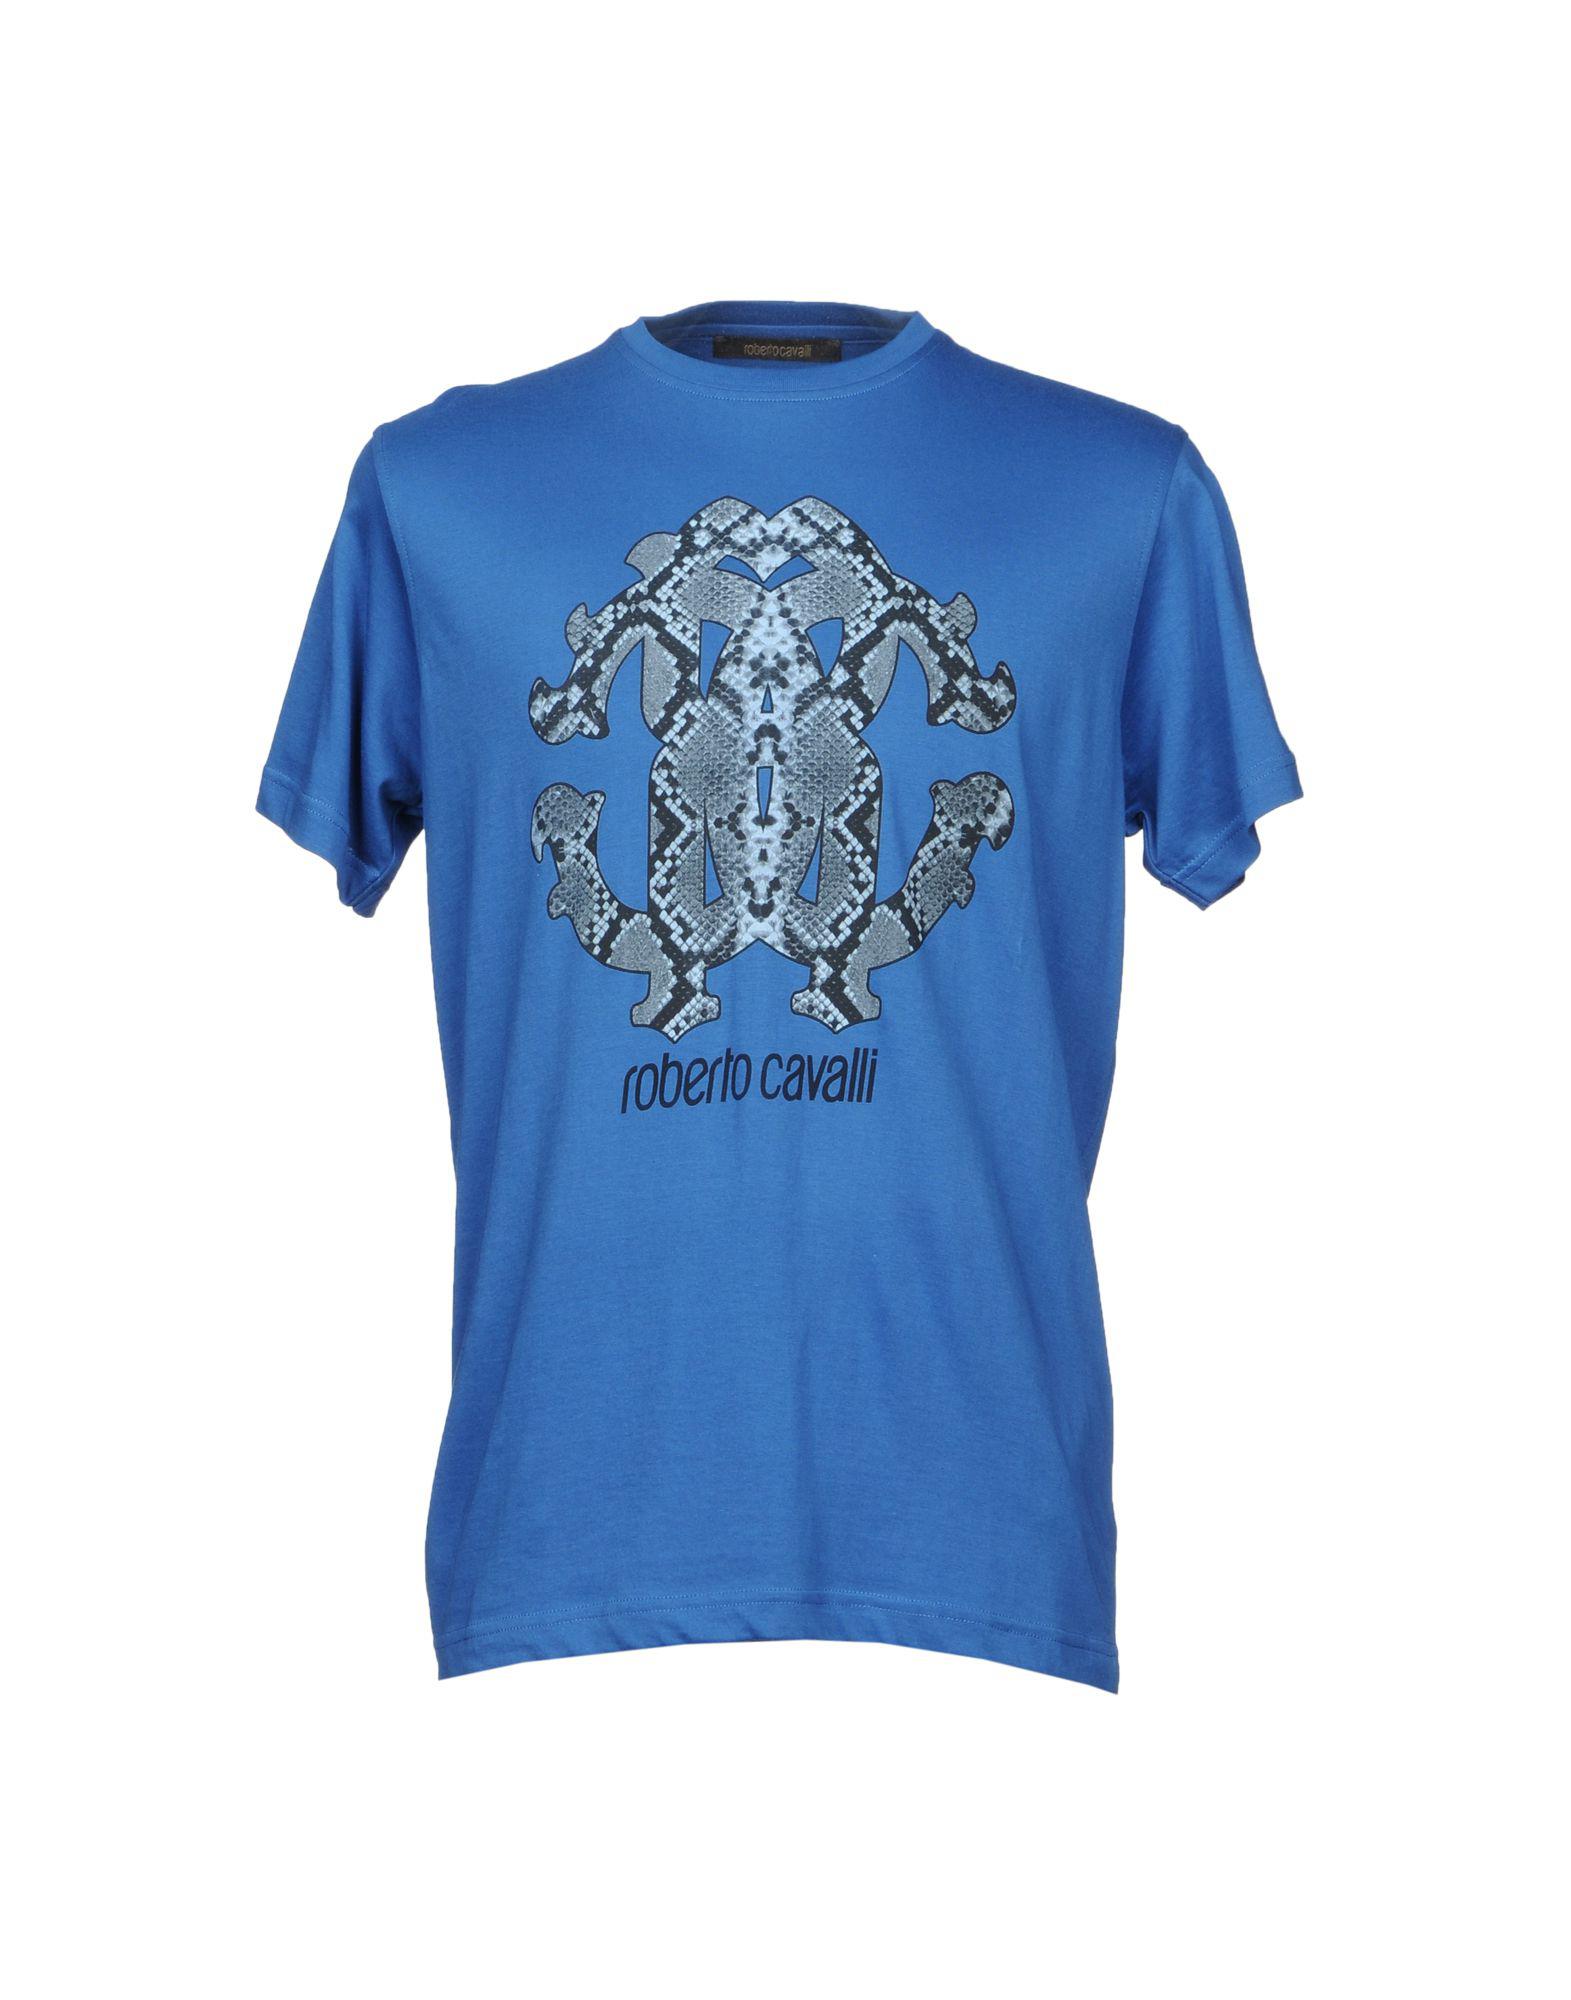 Lyst - Roberto Cavalli T-shirts in Blue for Men